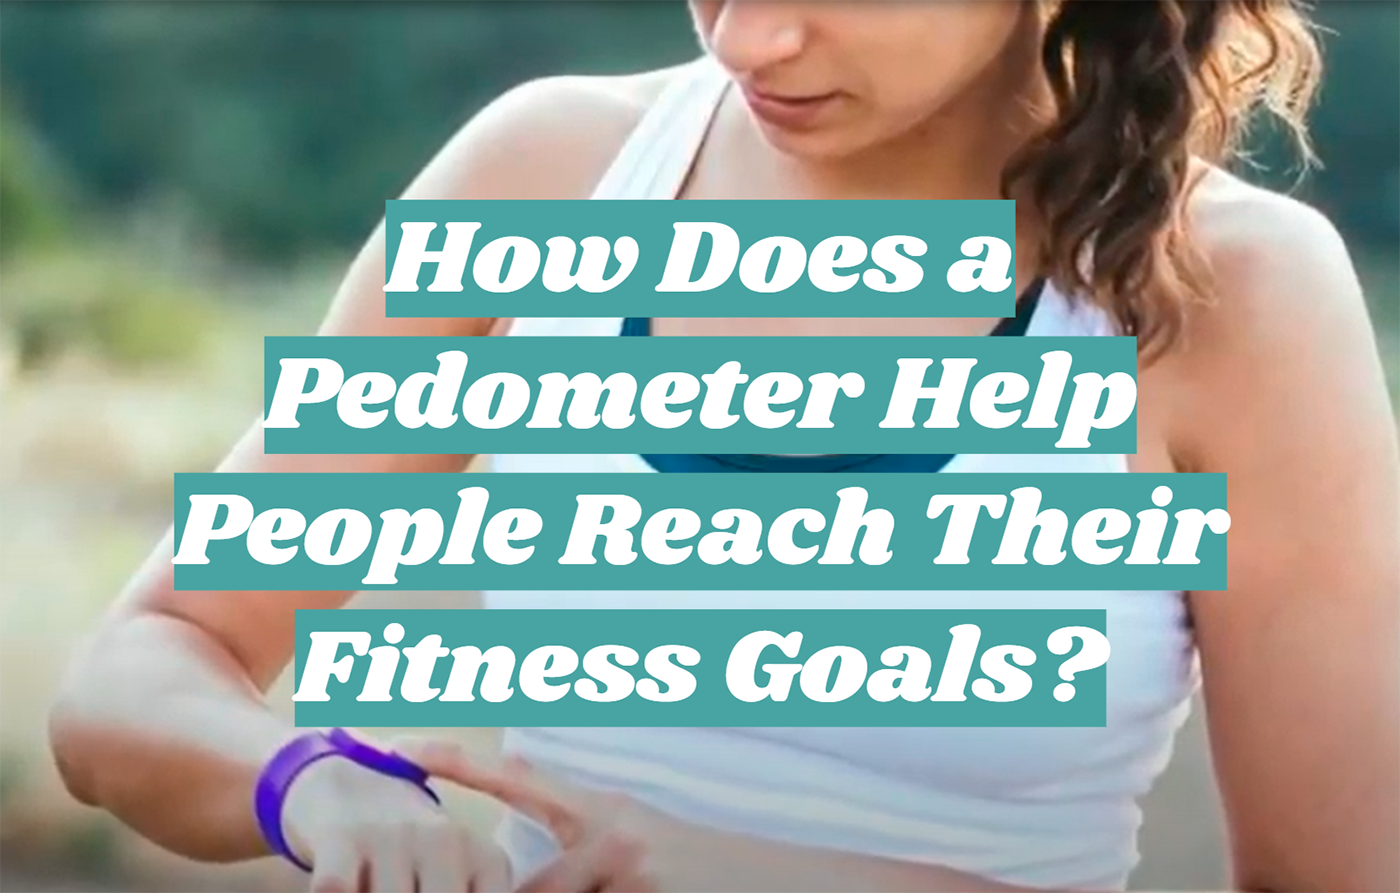 How Does a Pedometer Help People Reach Their Fitness Goals?